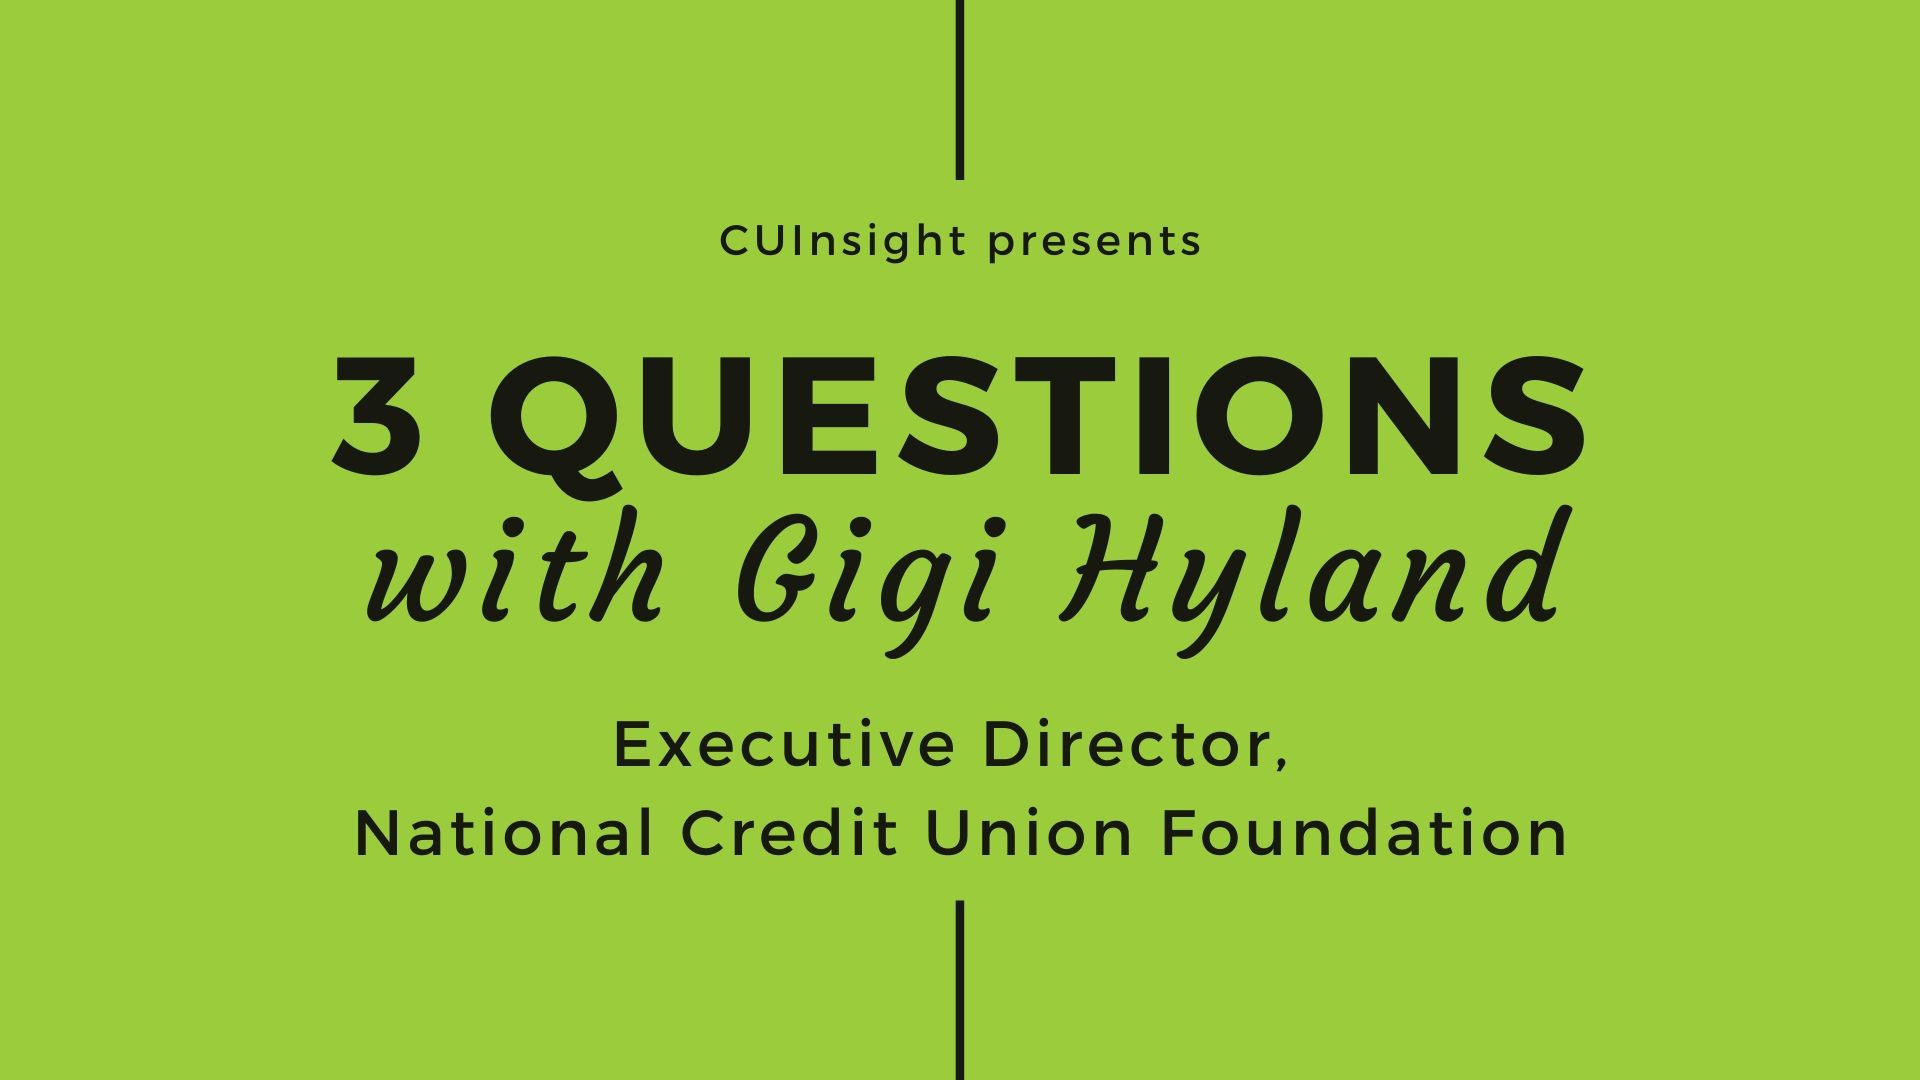 3 questions with The National Credit Union Foundation’s Gigi Hyland